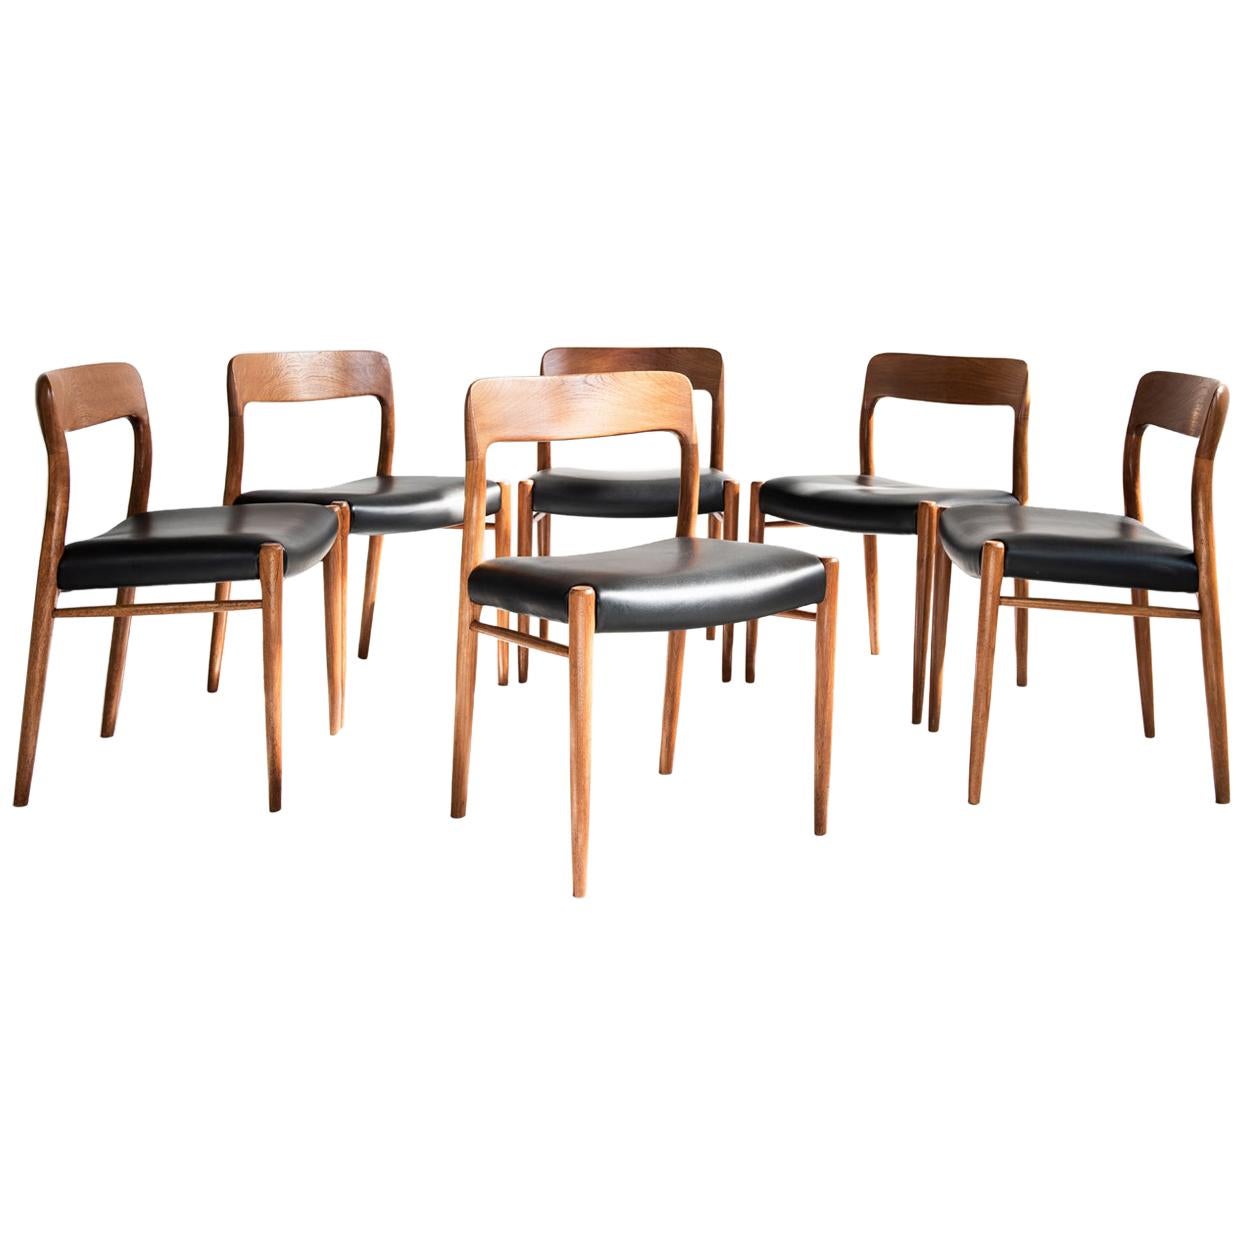 Midcentury Danish Set of 6 Chairs in Teak and Leather by Møller